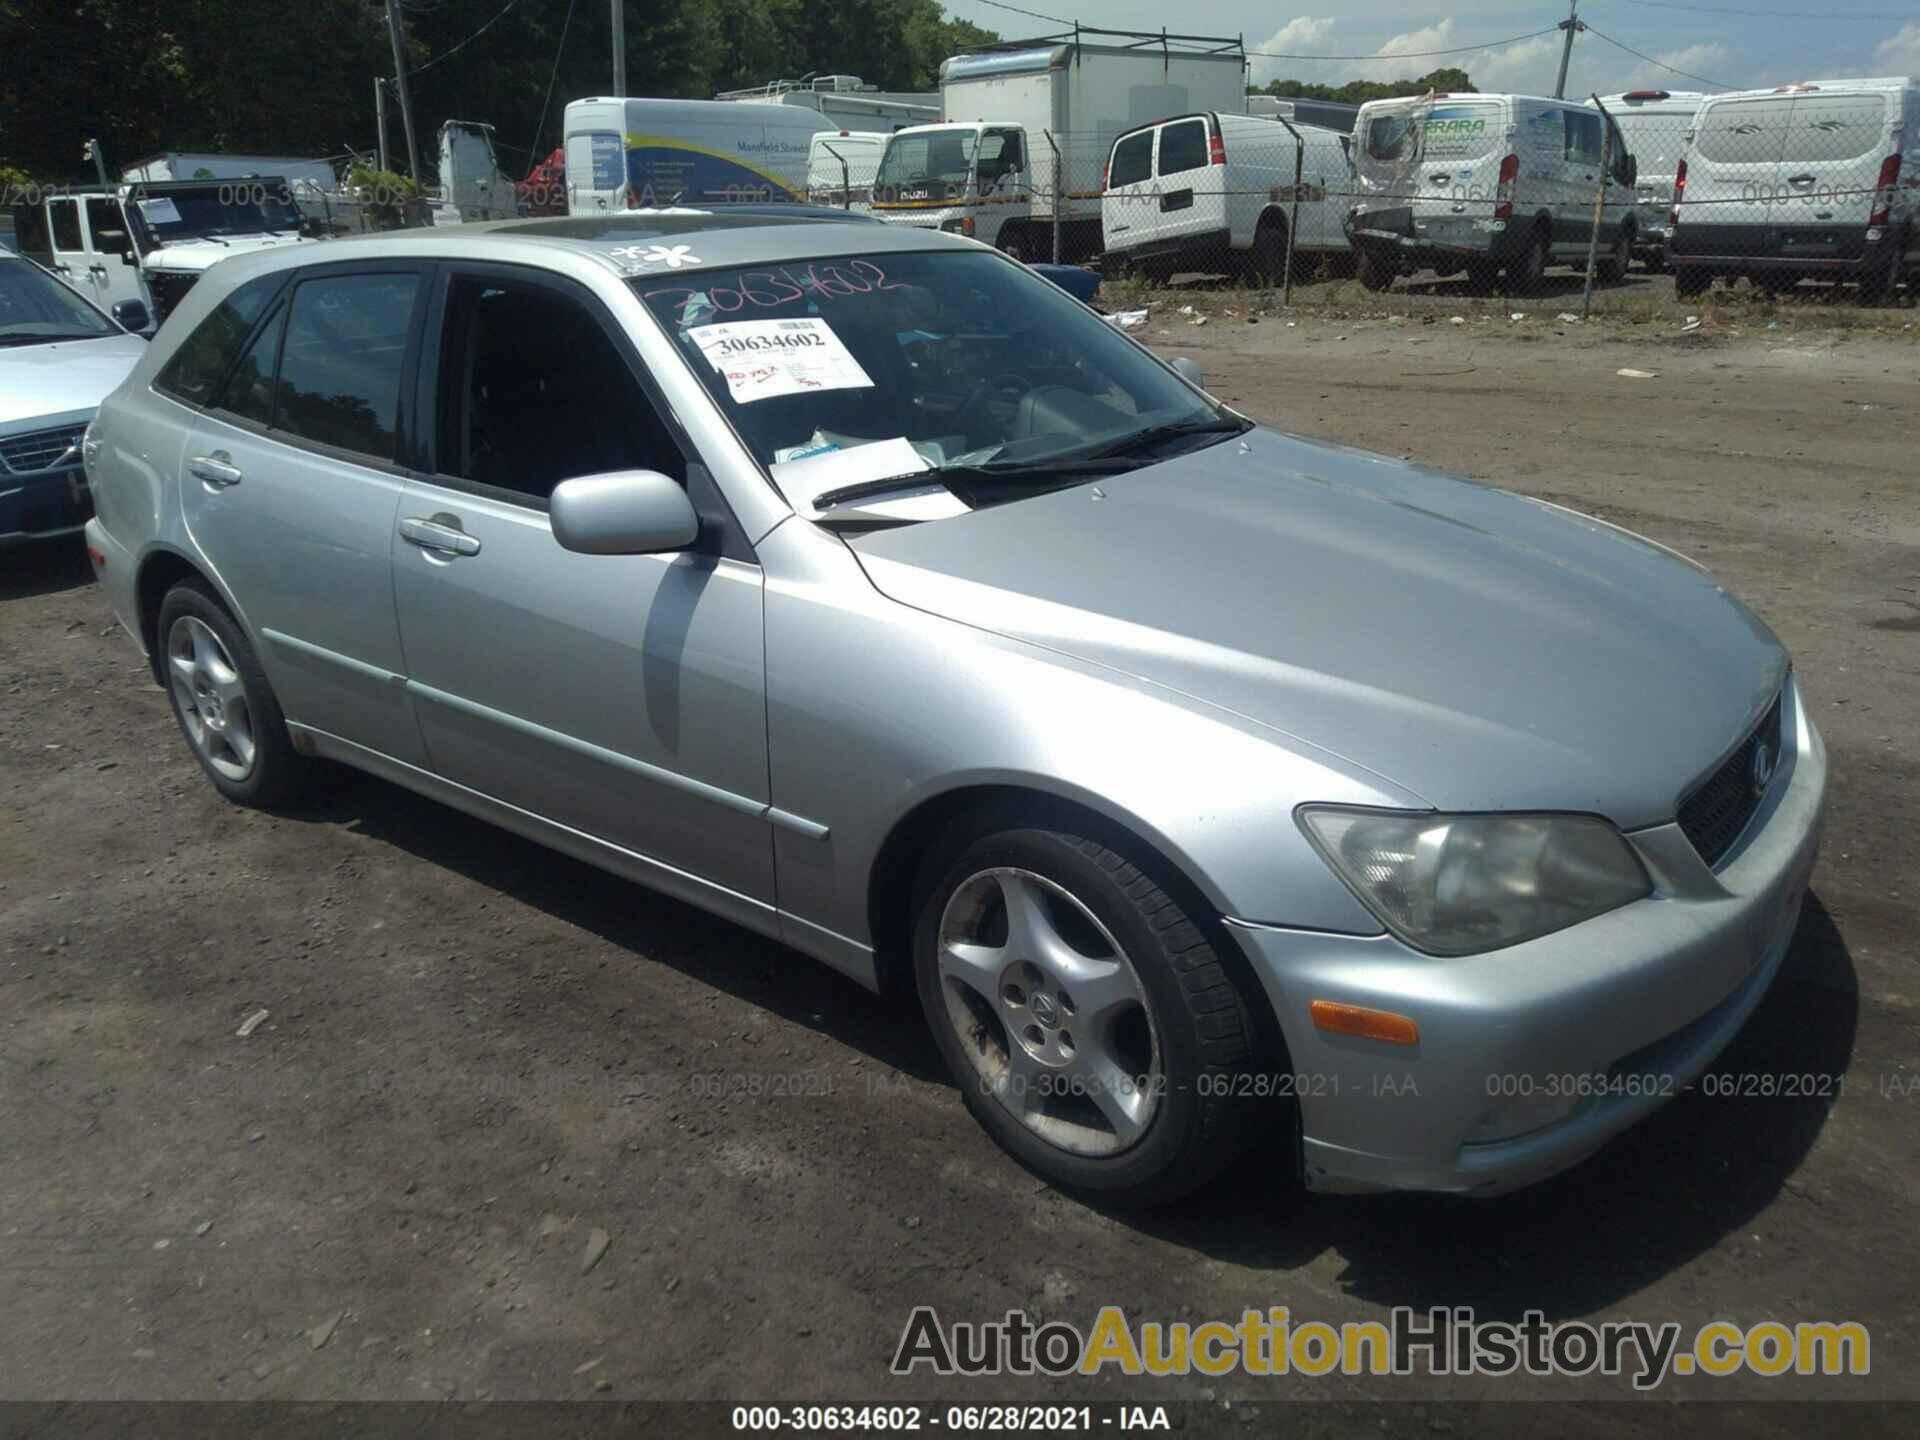 LEXUS IS 300, JTHED192020041721